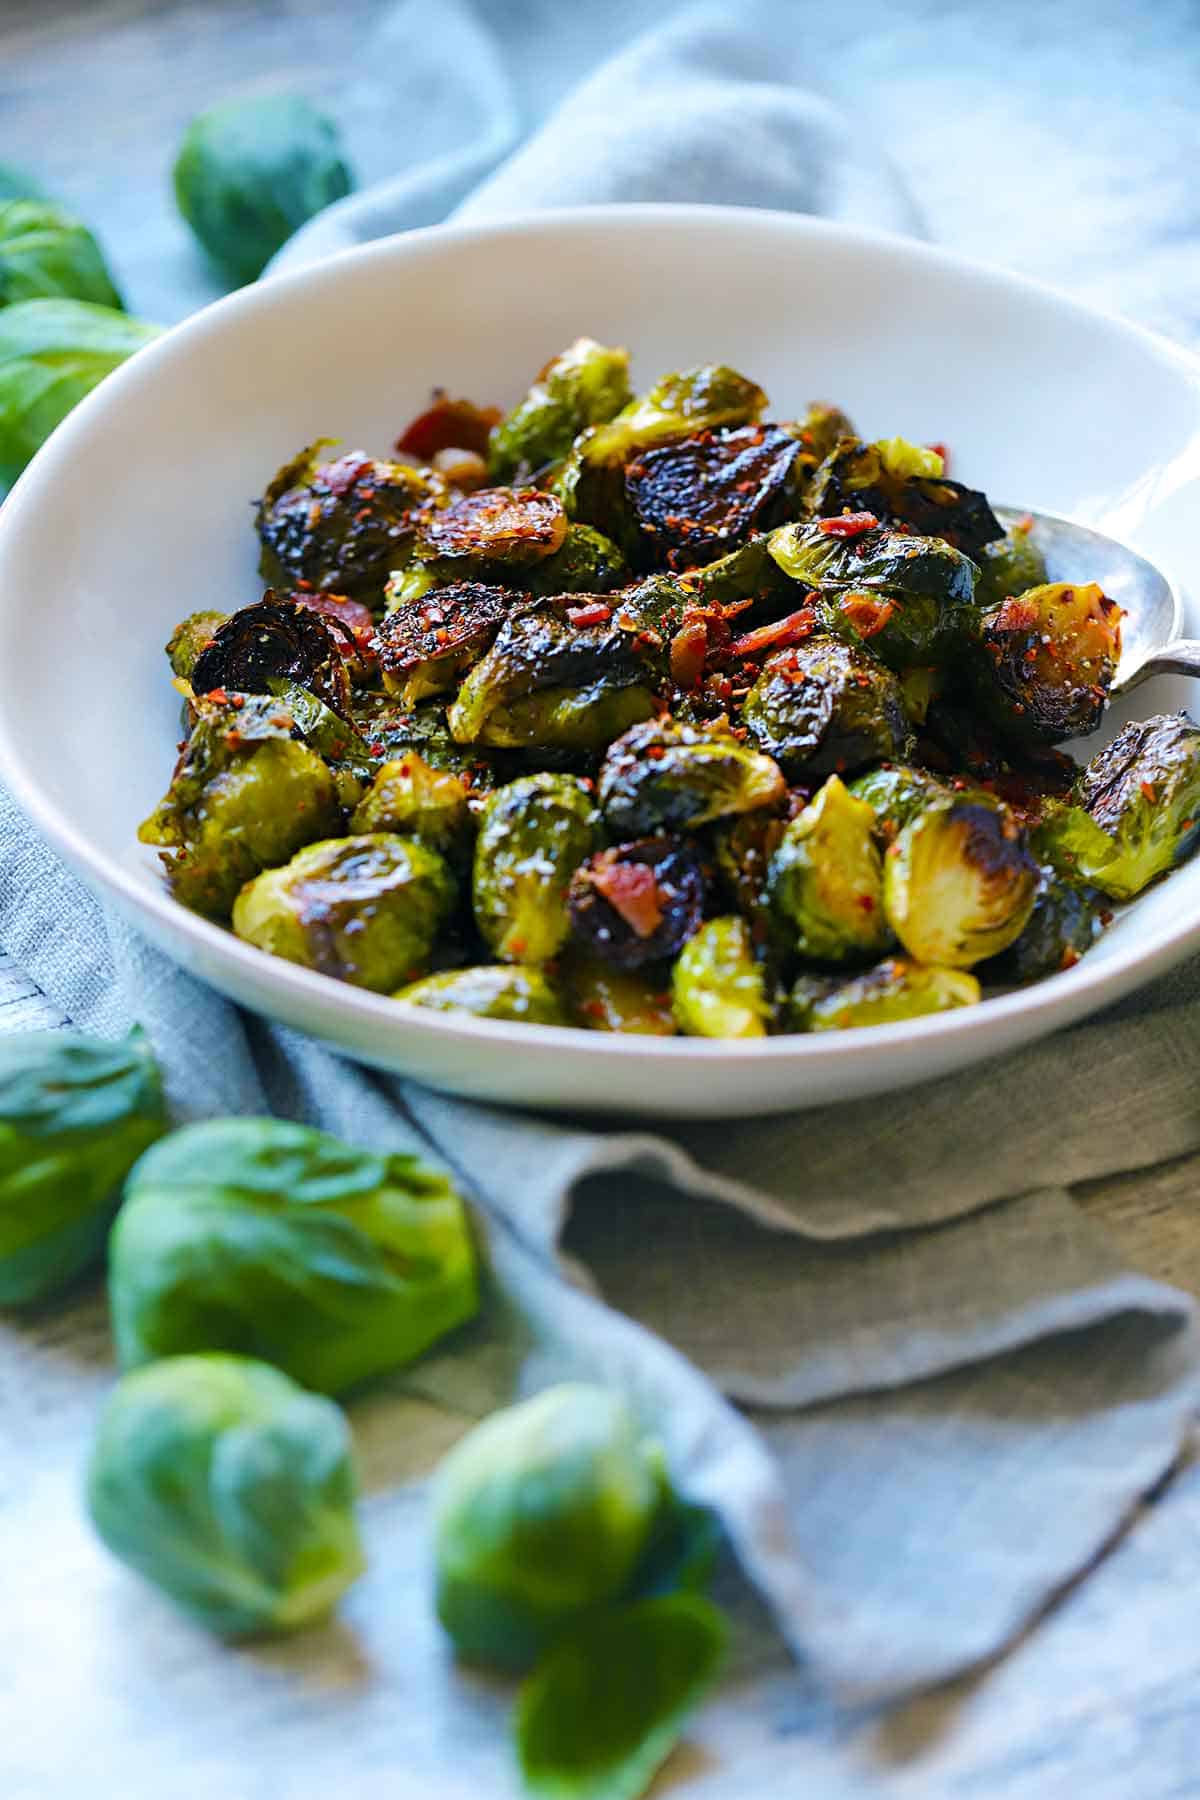 Side view of maple roasted brussels sprouts with raw brussels sprouts scattered around.